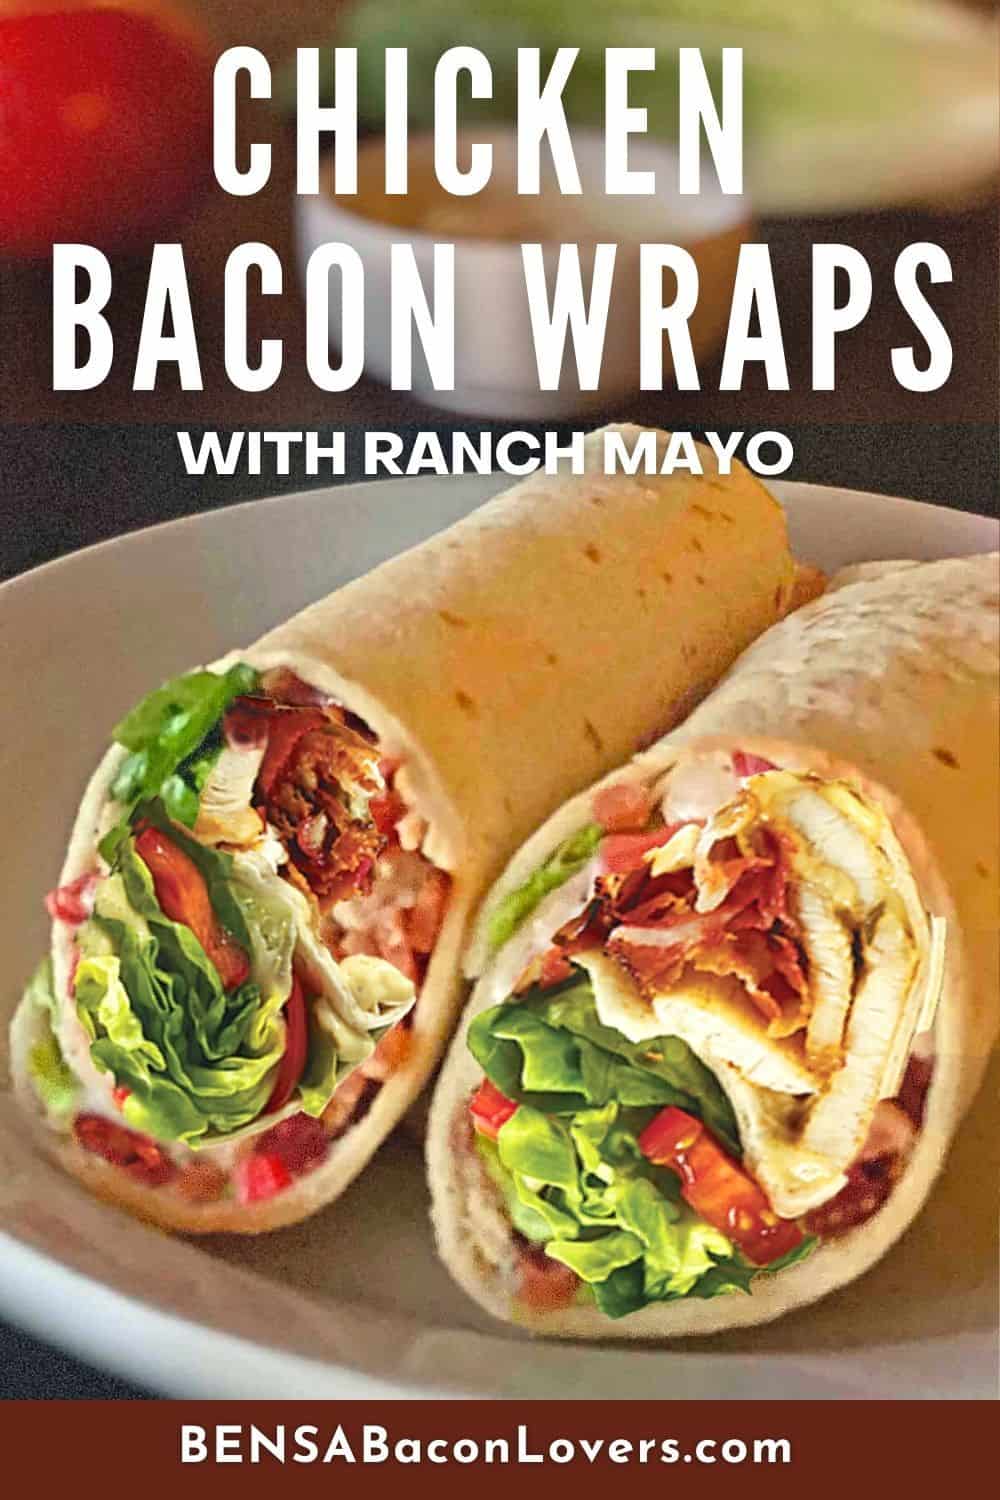 A Pinterest pin for Chicken Bacon Wraps with Ranch Mayo with a close up photo of the finished wraps cut in half.